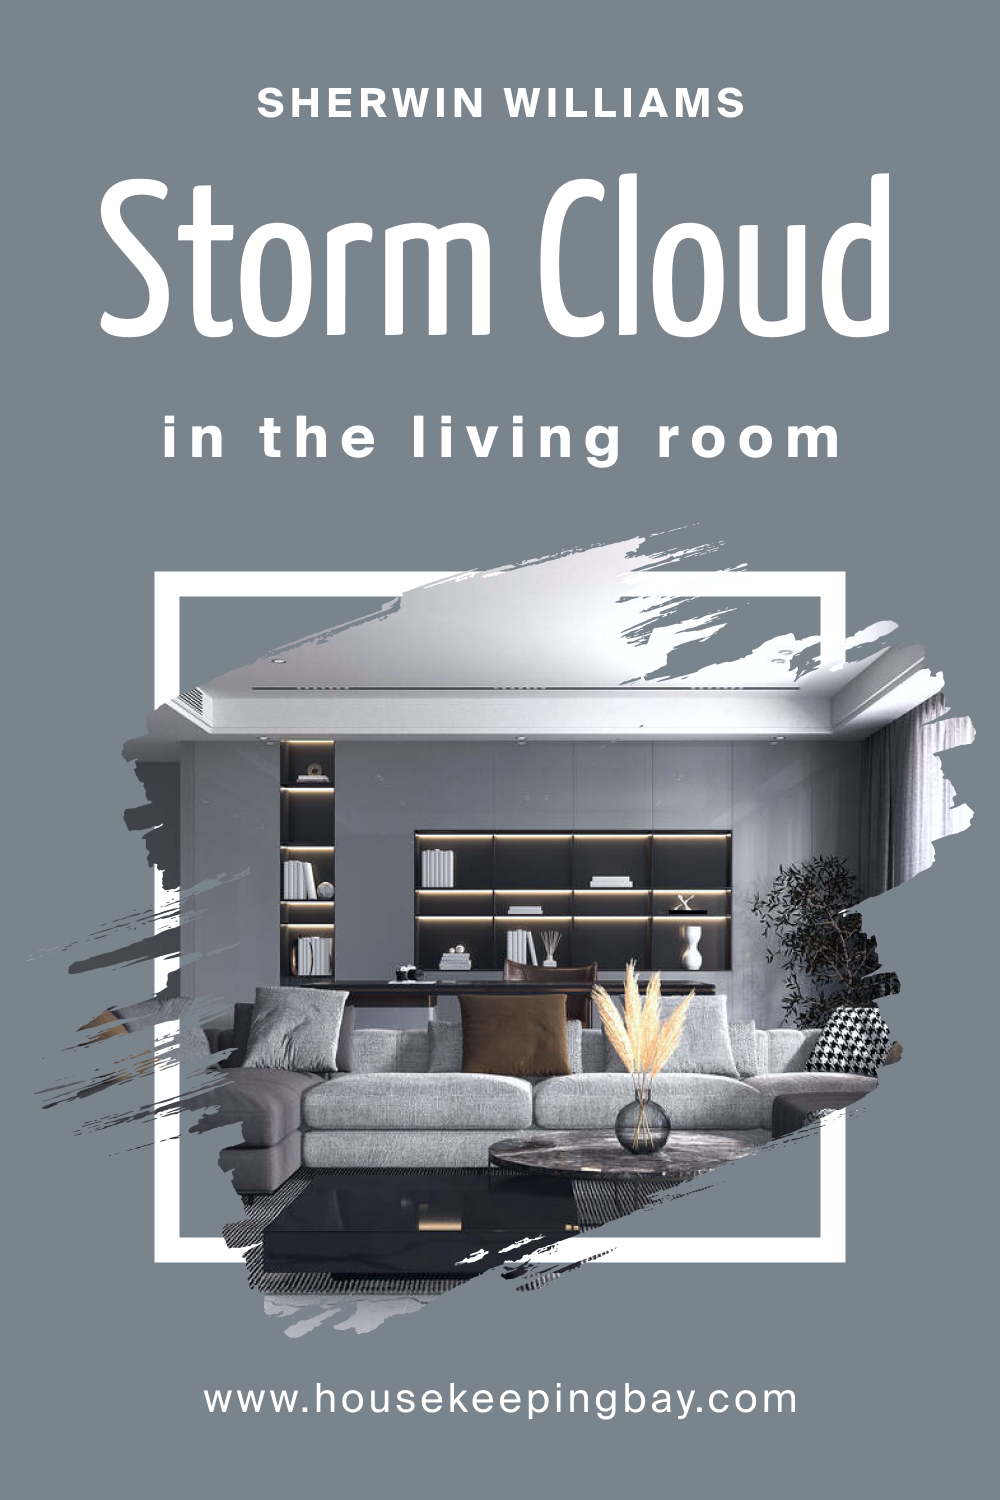 Sherwin Williams. SW 6249 Storm Cloud In the Living Room